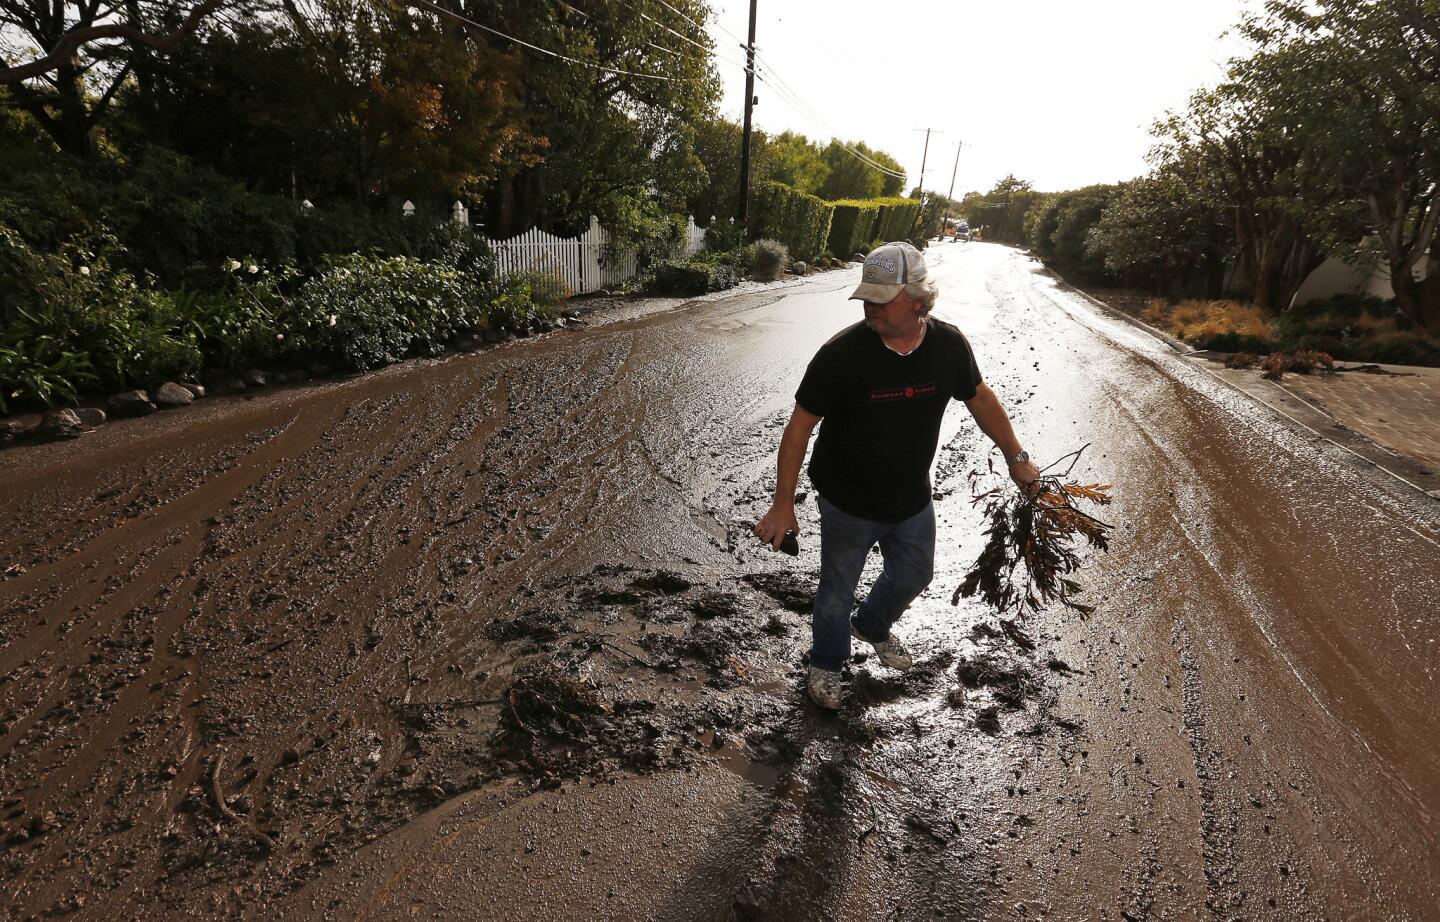 Troy Miller trudges through the mud near his home in western Malibu on Thursday afternoon. Rain triggered mudflows in hills loosened by the Woolsey fire.